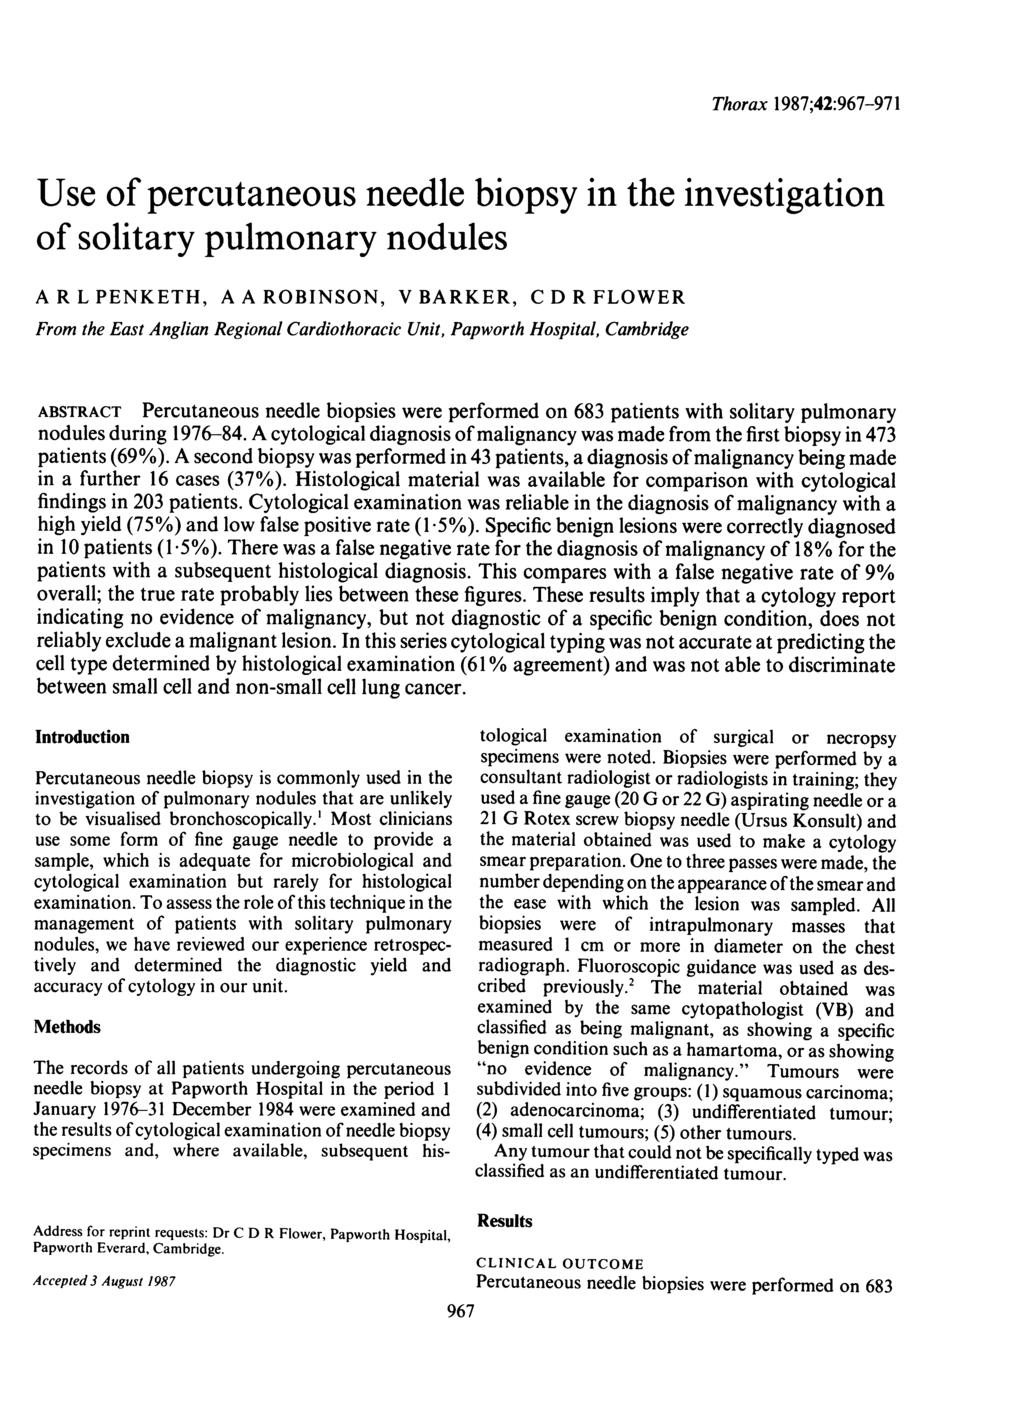 Thorax 1987;42:967-971 Use of percutaneous needle biopsy in the investigation of solitary pulmonary nodules A R L PENKETH, A A ROBINSON, V BARKER, C D R FLOWER From the East Anglian Regional